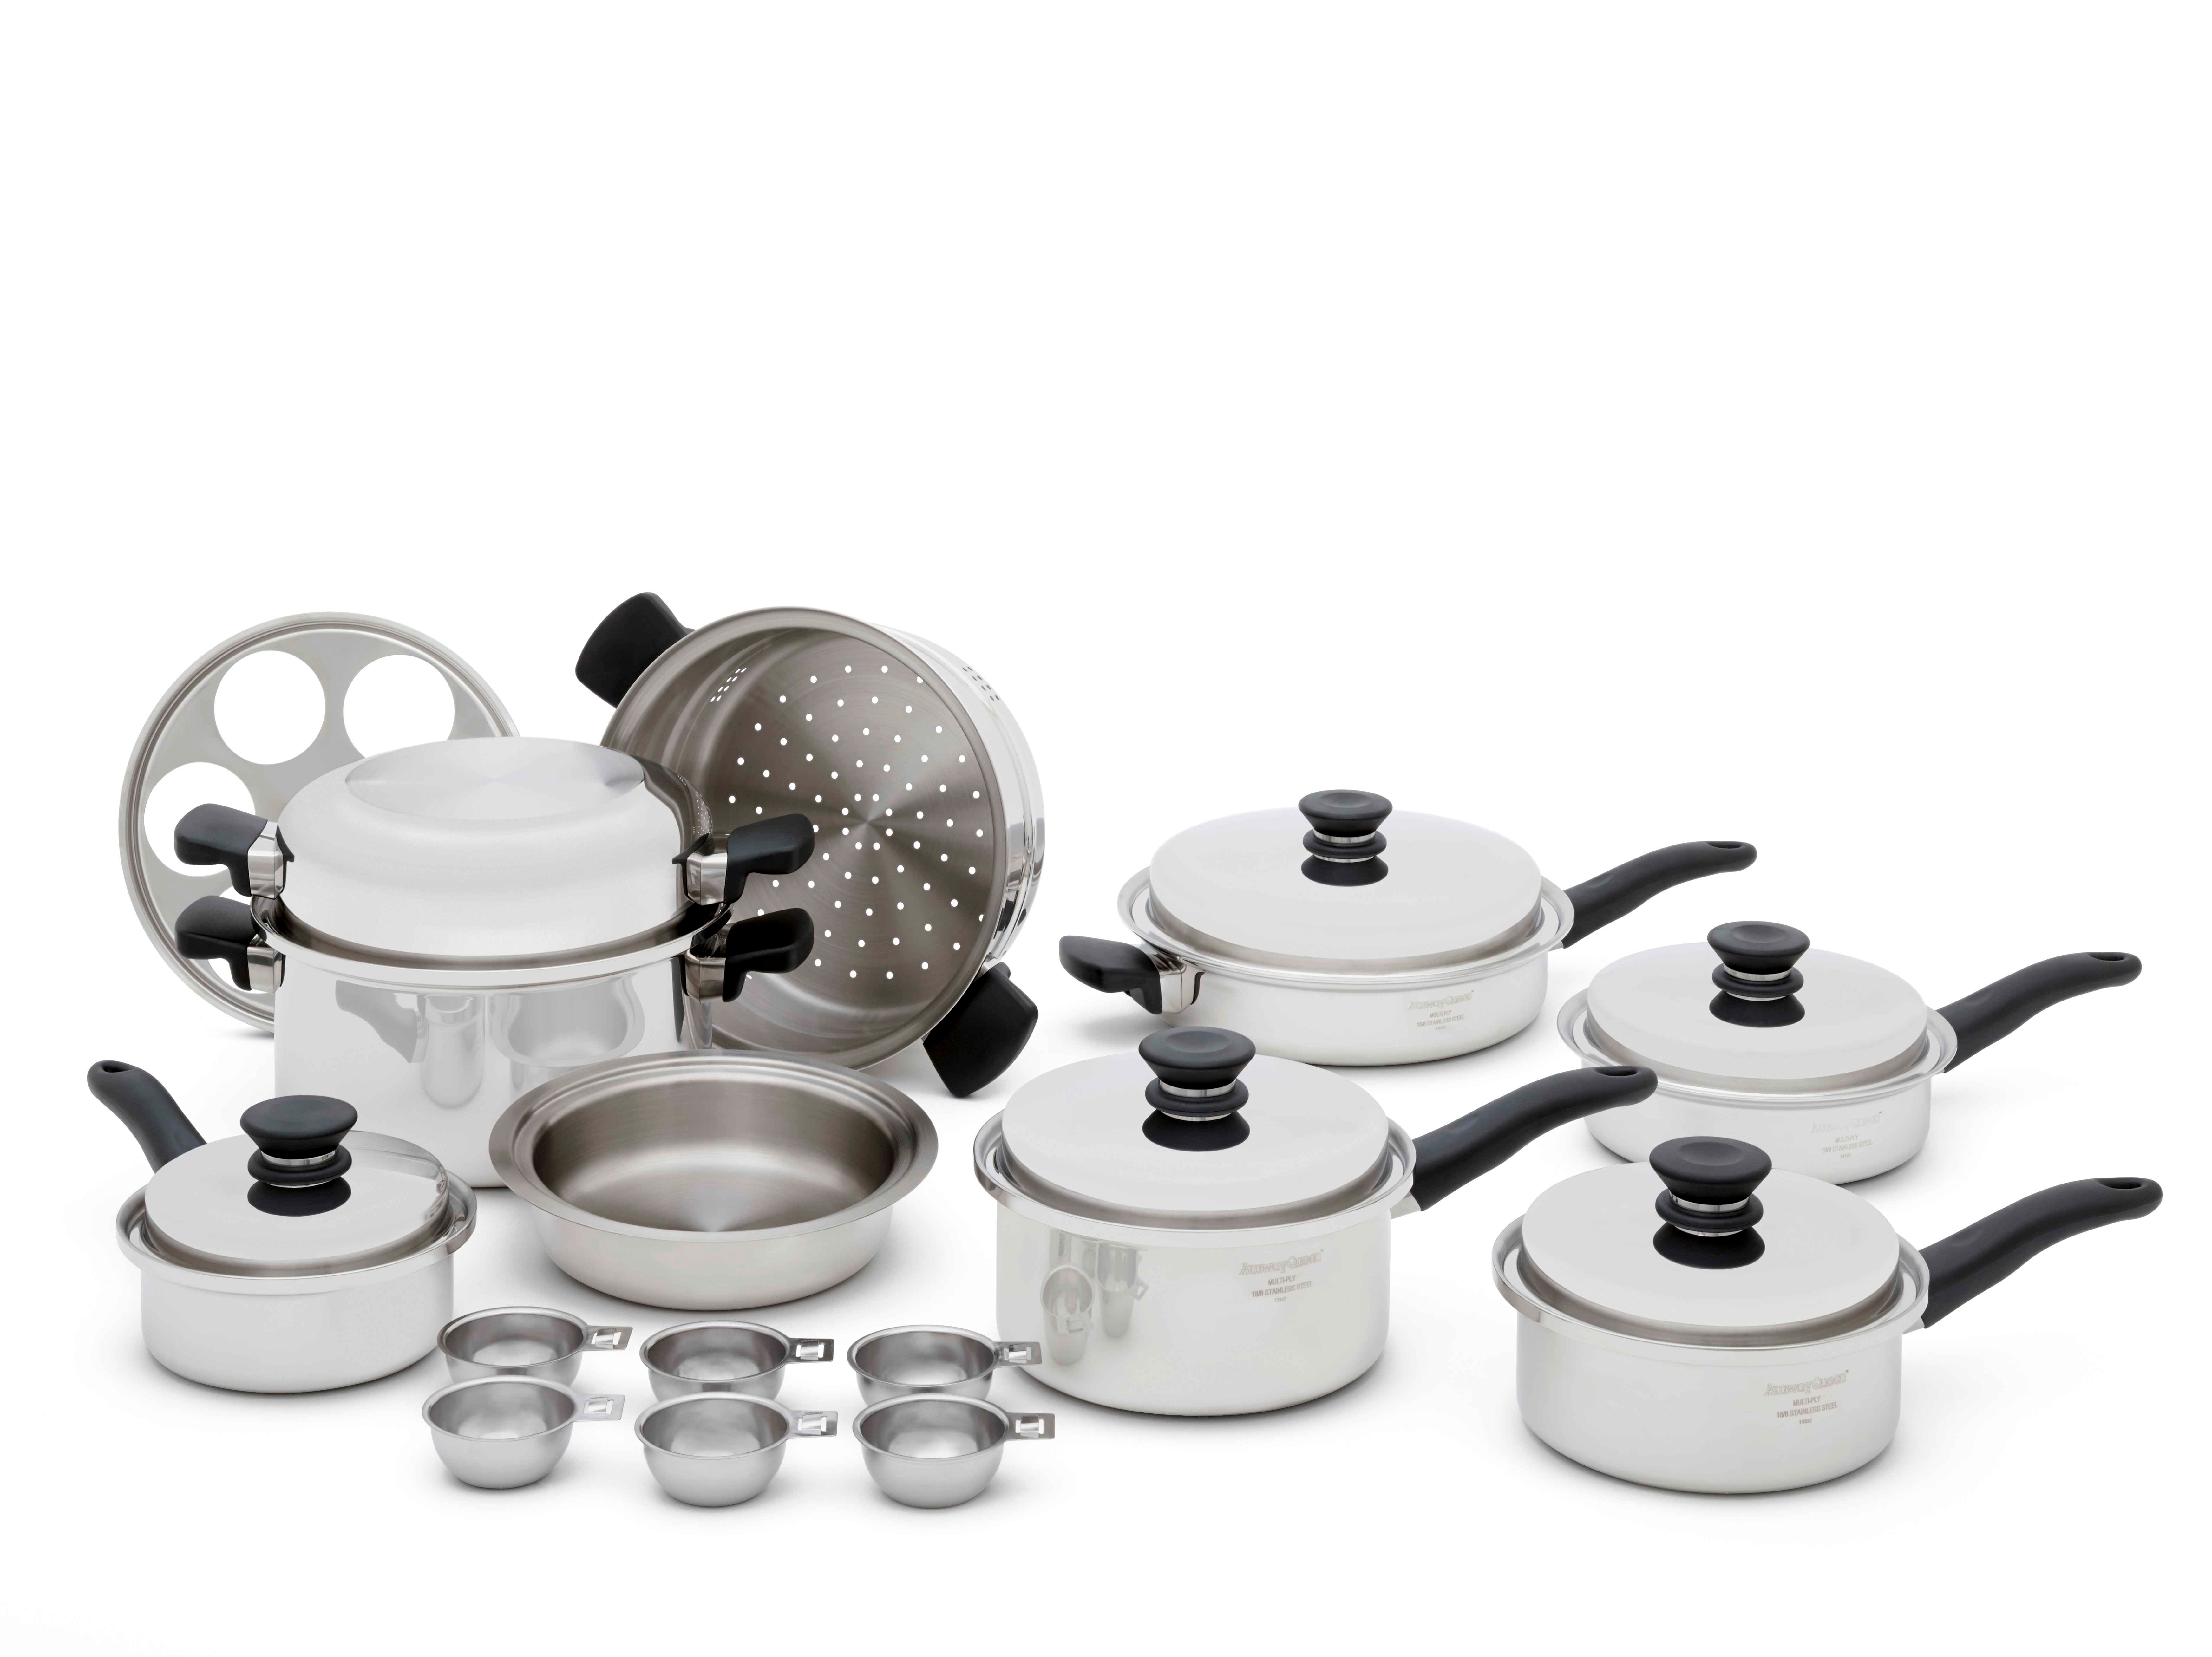 Enjoy Cooking in an Easier Way with Amway Queen™ Cookware Set